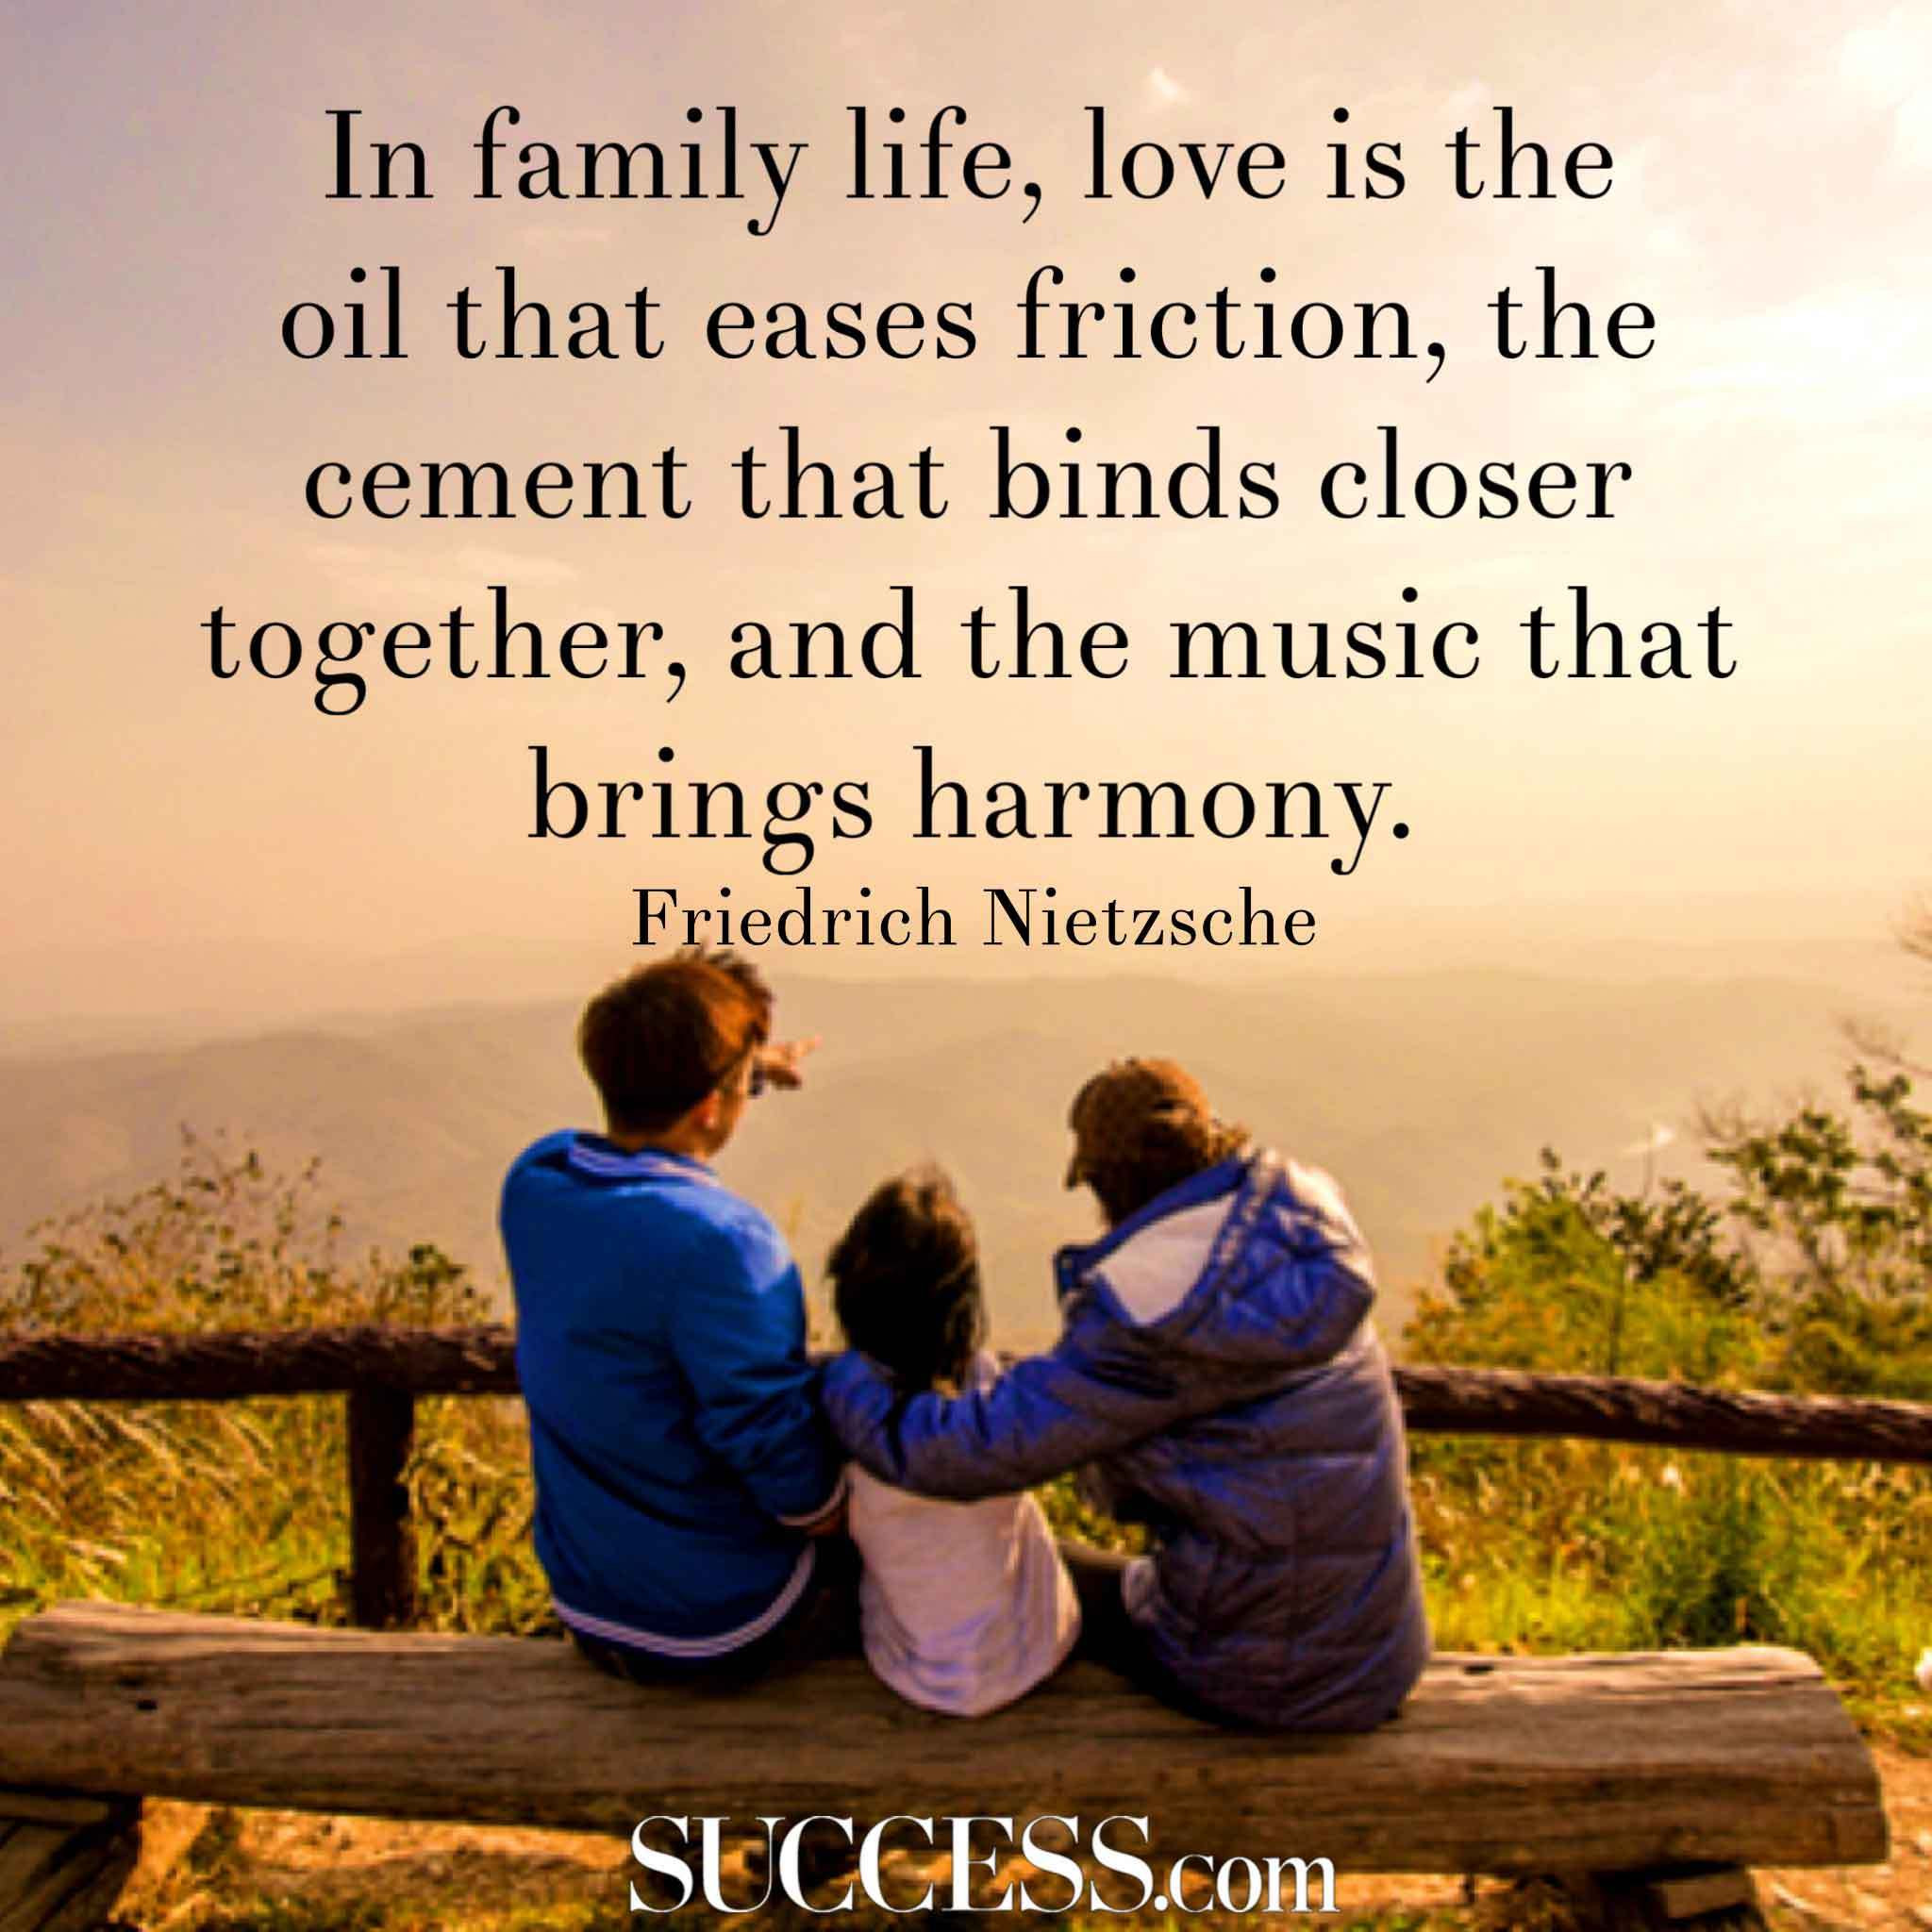 Love And Family Quotes
 14 Loving Quotes About Family